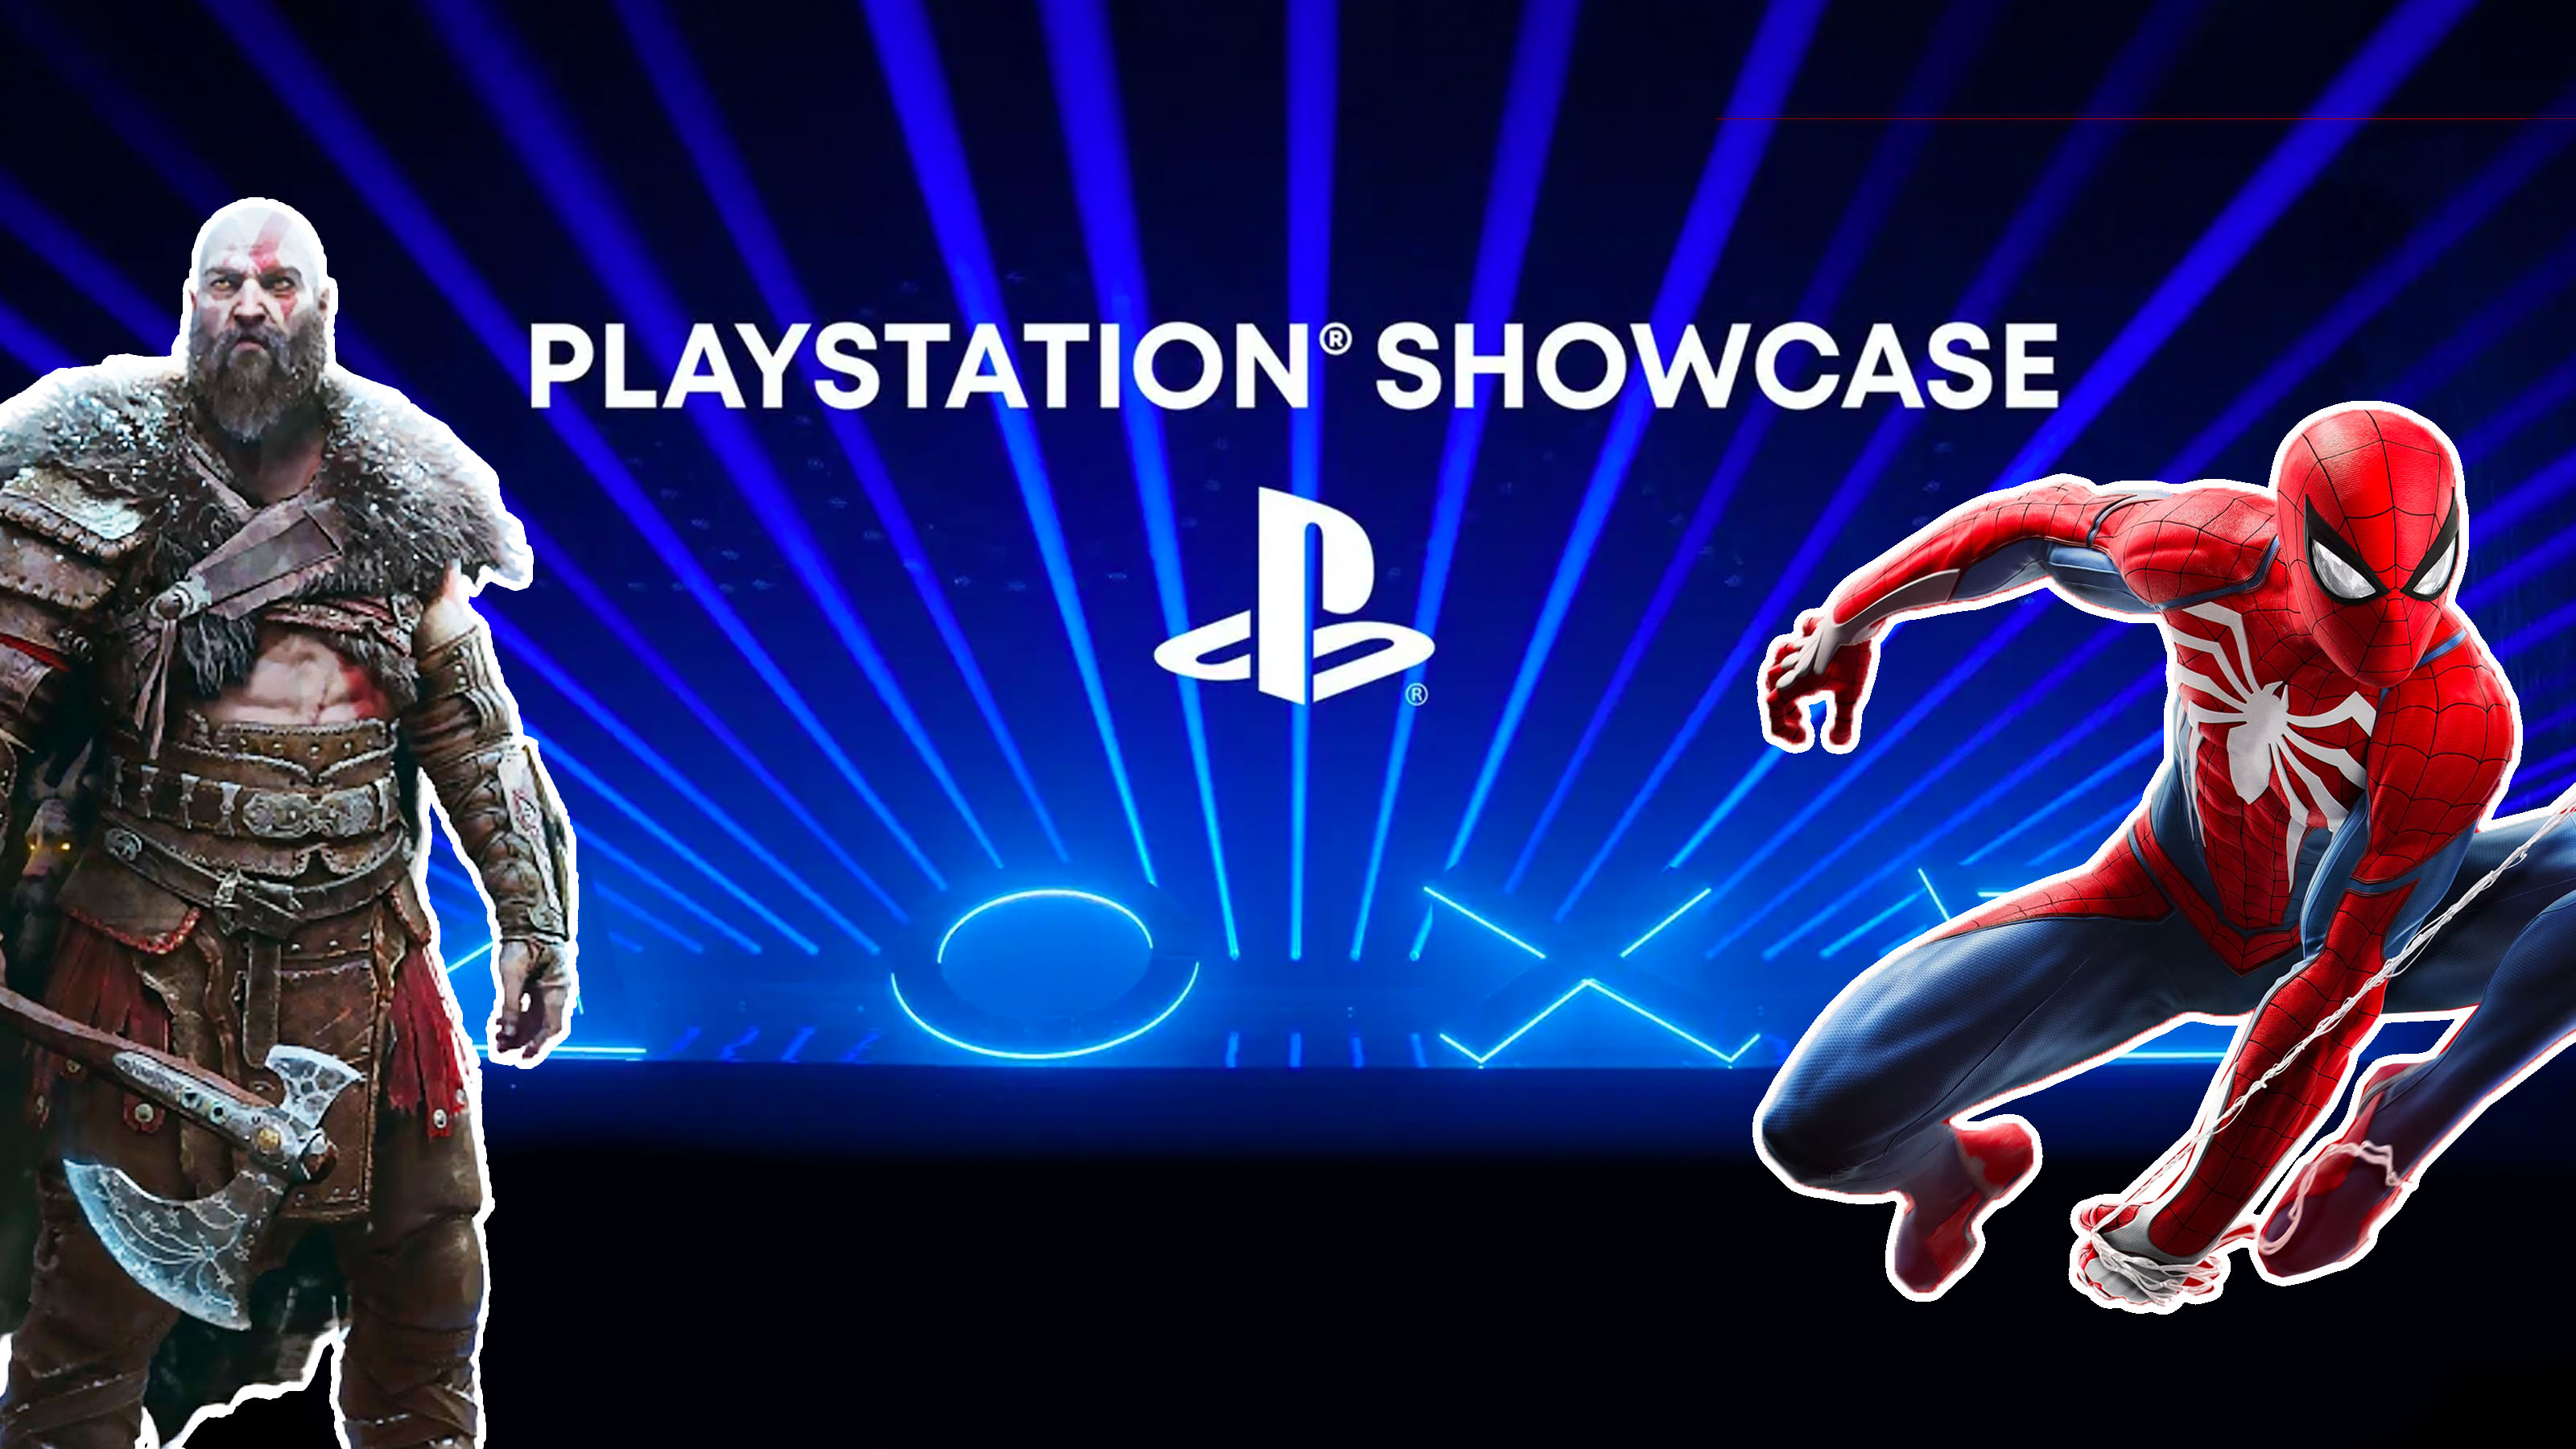 The hyped PlayStation showcase finely has a date, so what can we expect